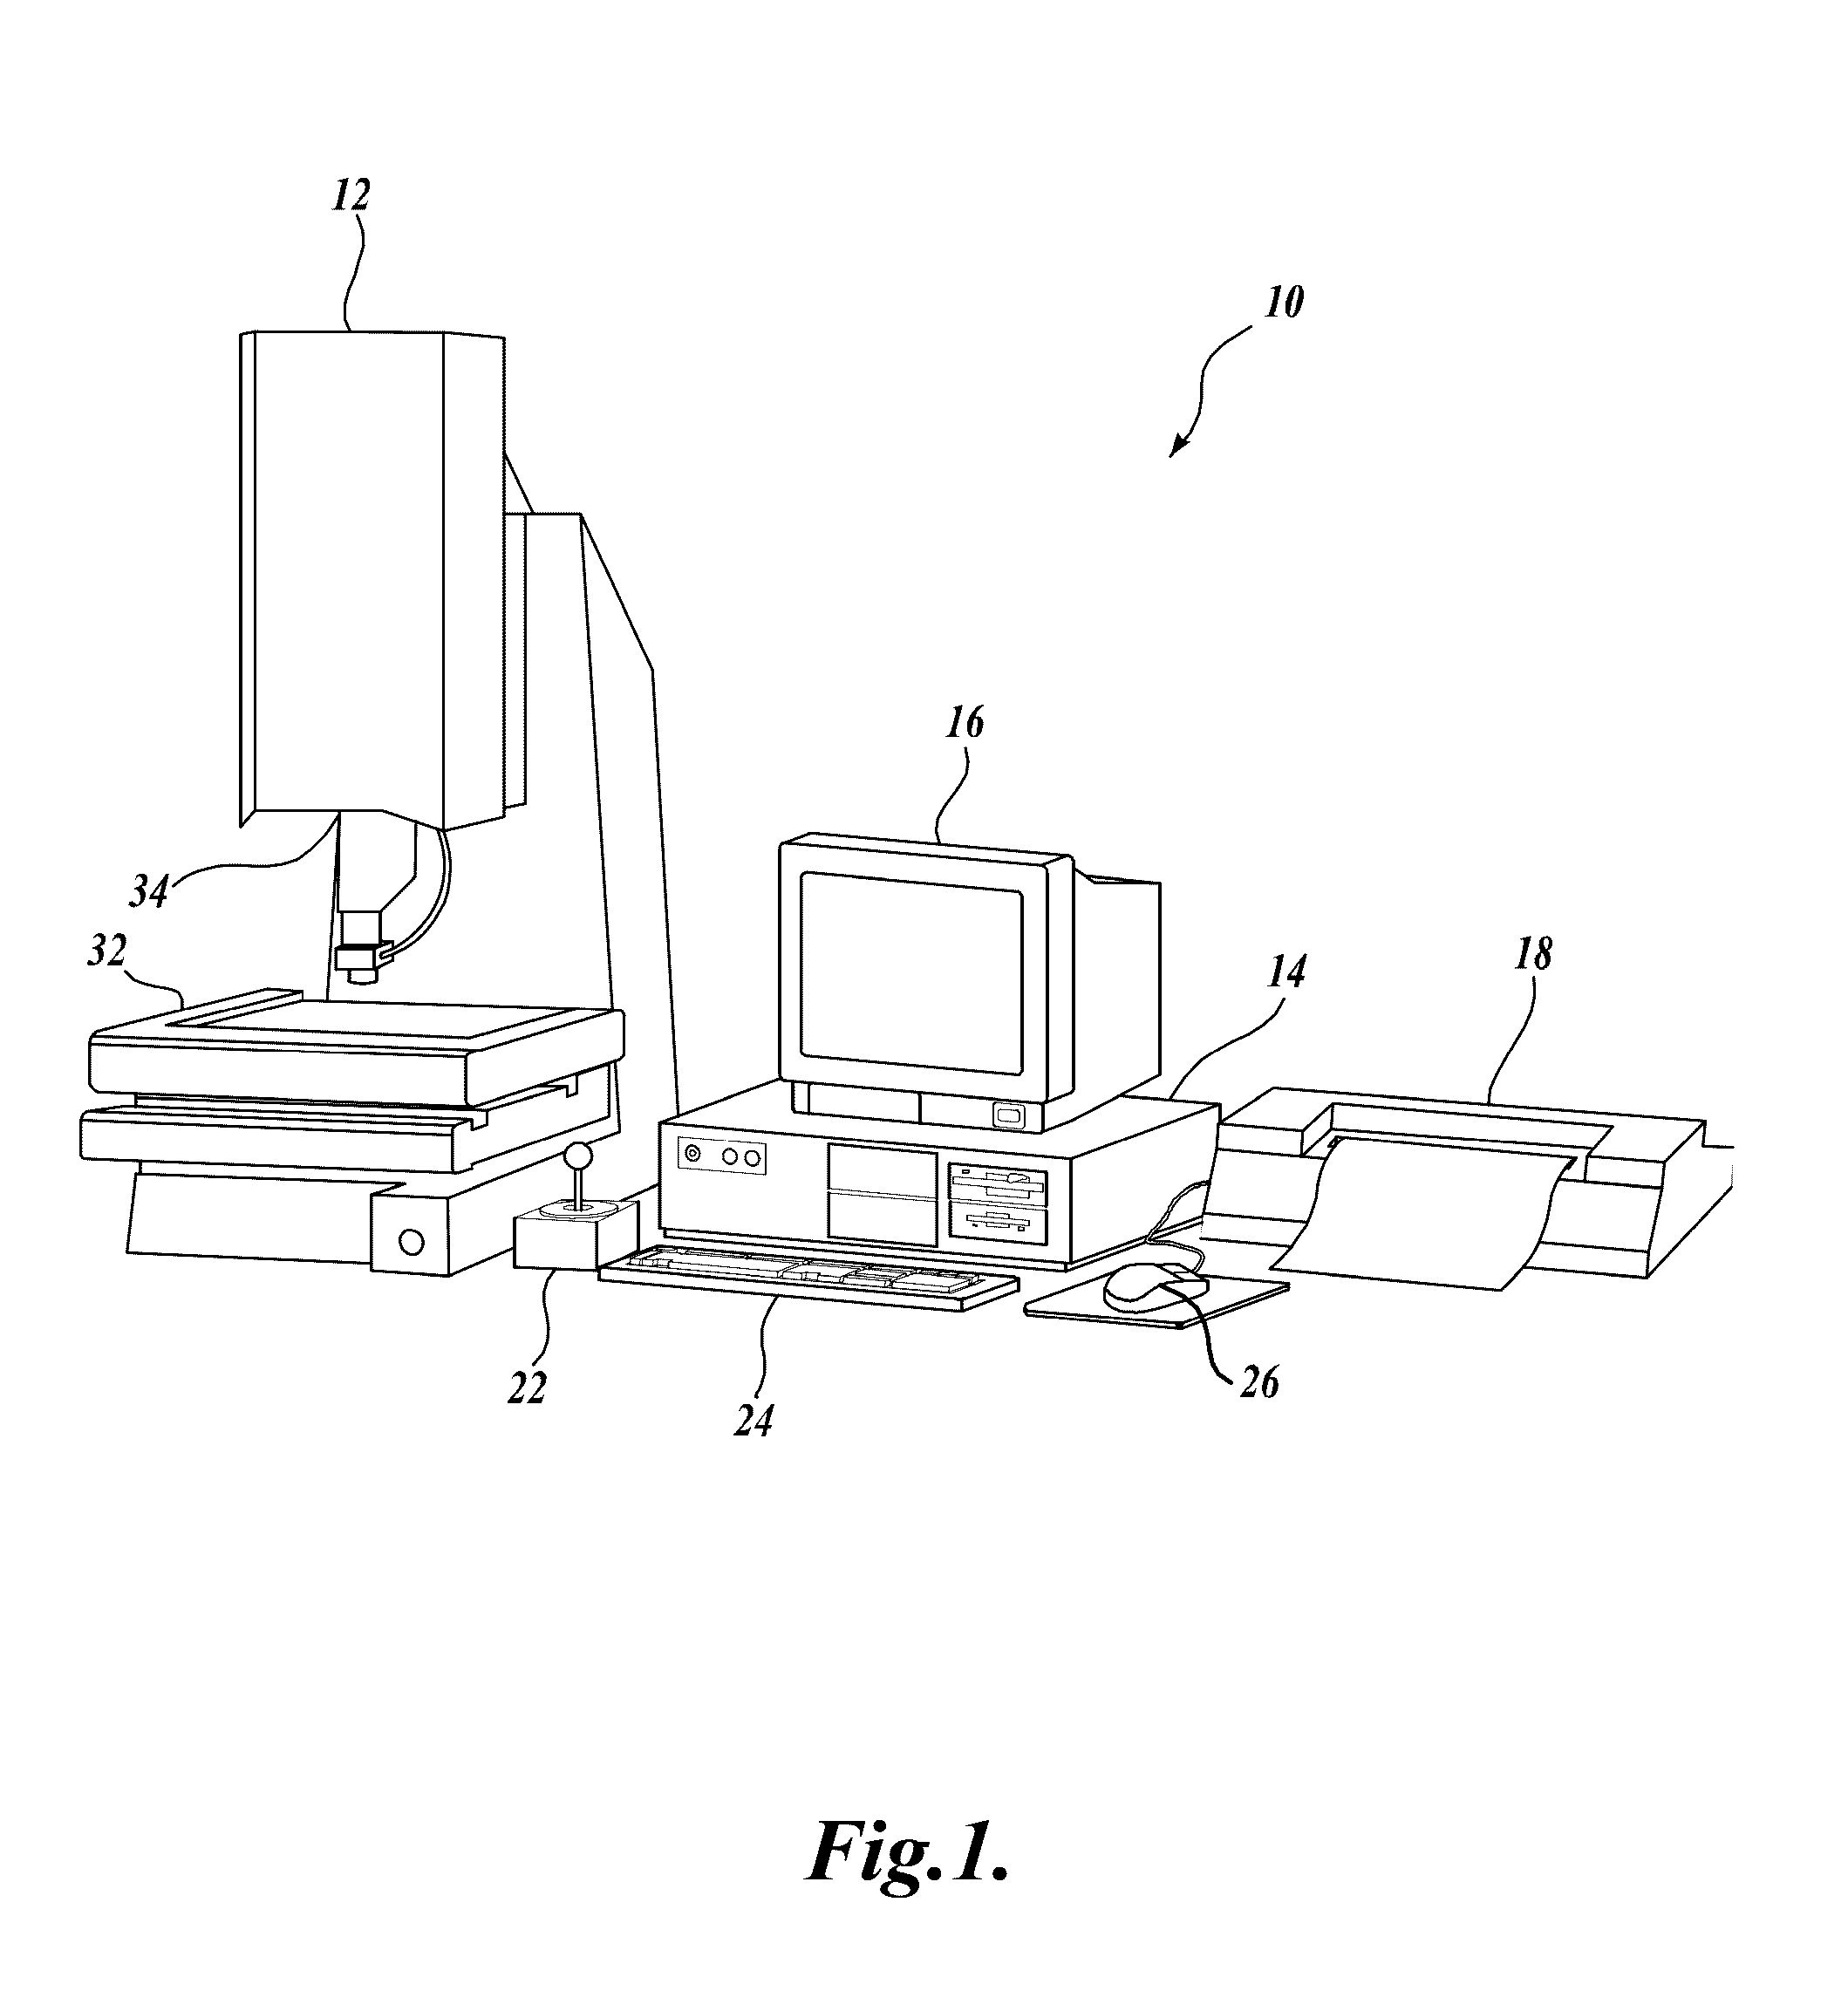 Multi-level image focus using a tunable lens in a machine vision inspection system